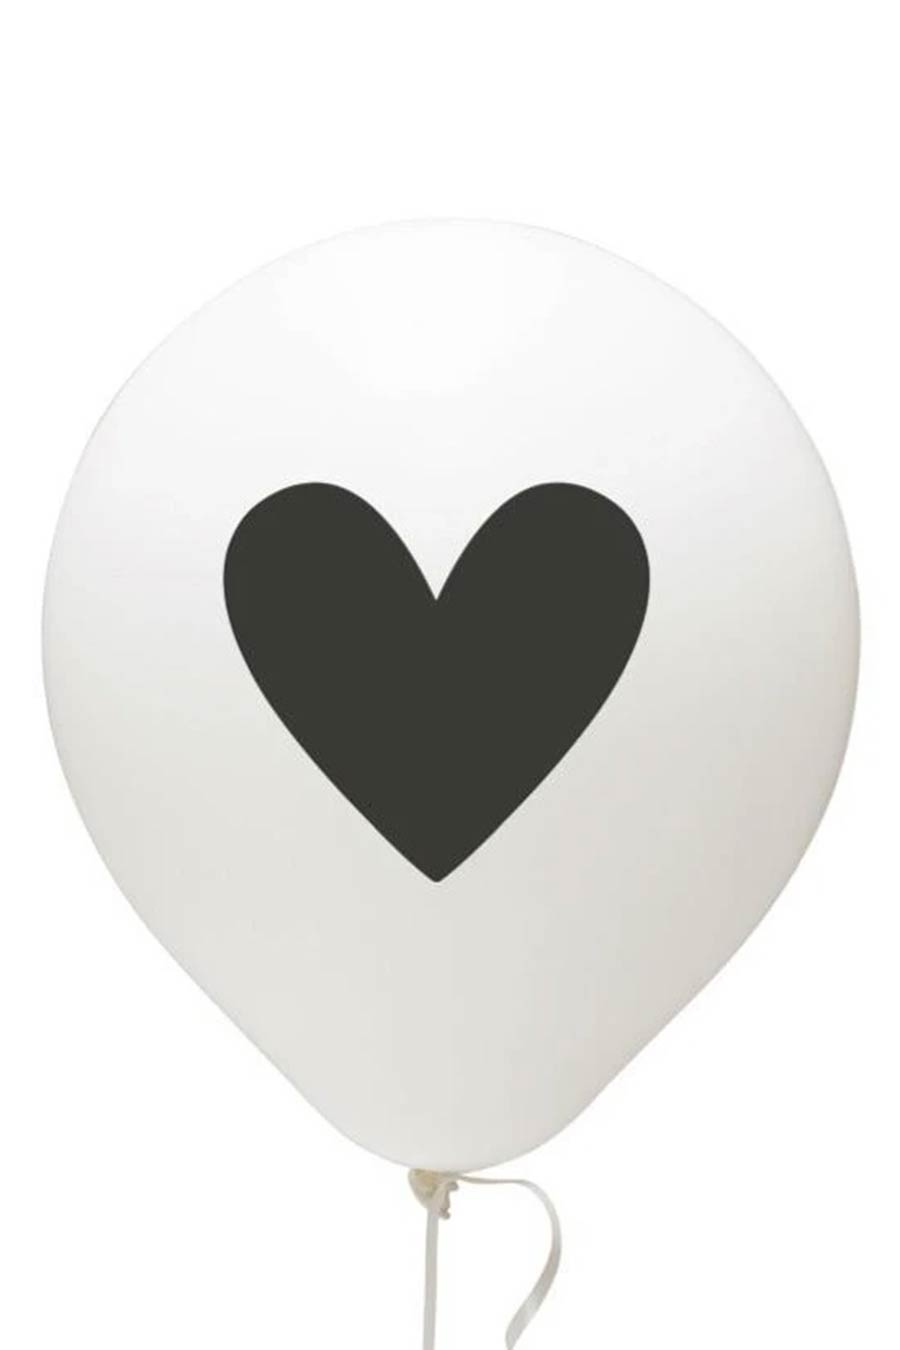 Heart Balloon Pack - Main Image Number 1 of 2